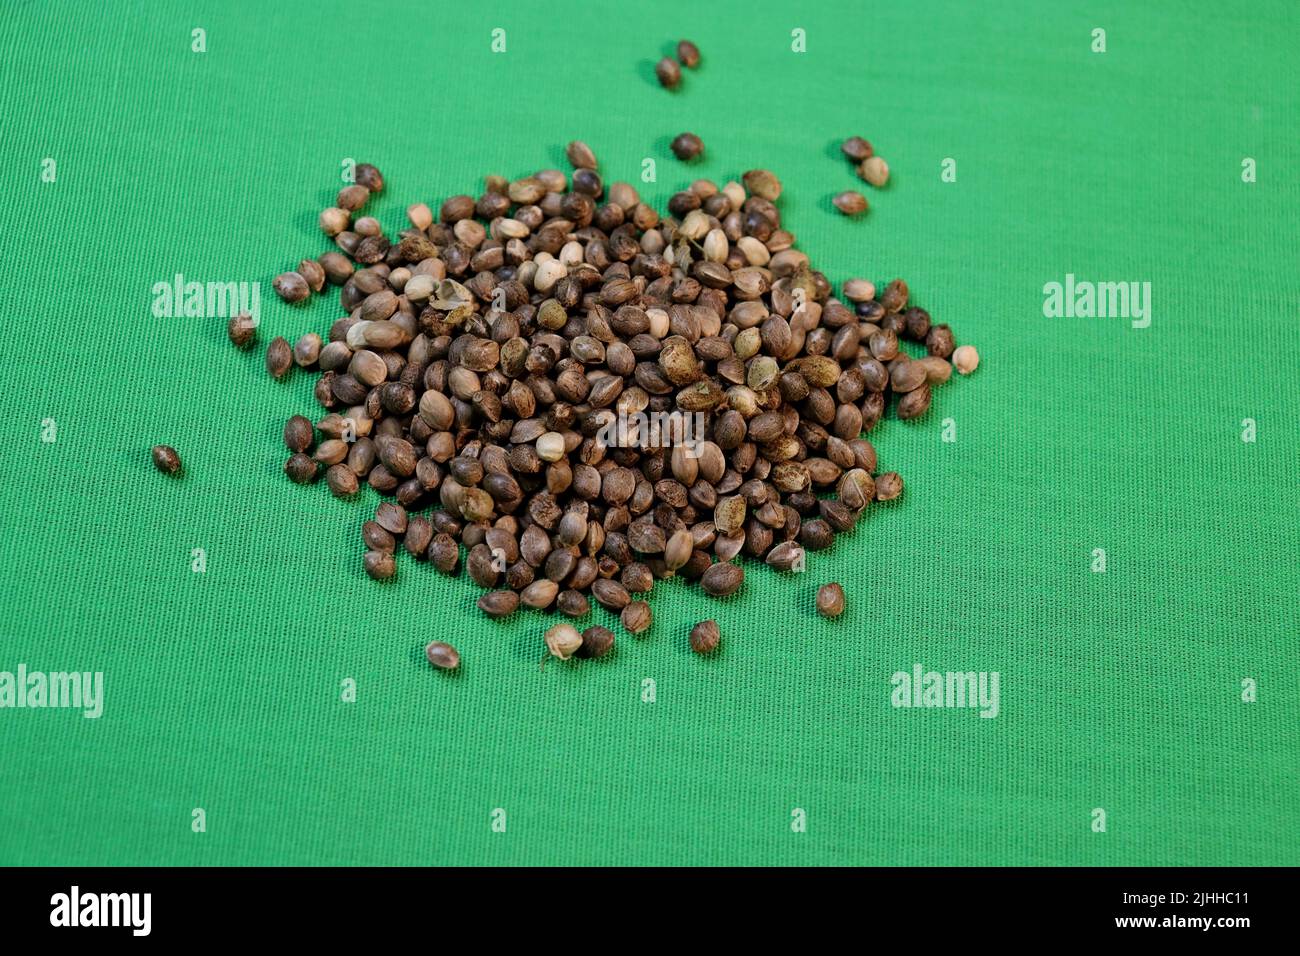 A pile of cannabis seeds of unknown origin or strain on a green cloth backdrop. Stock Photo